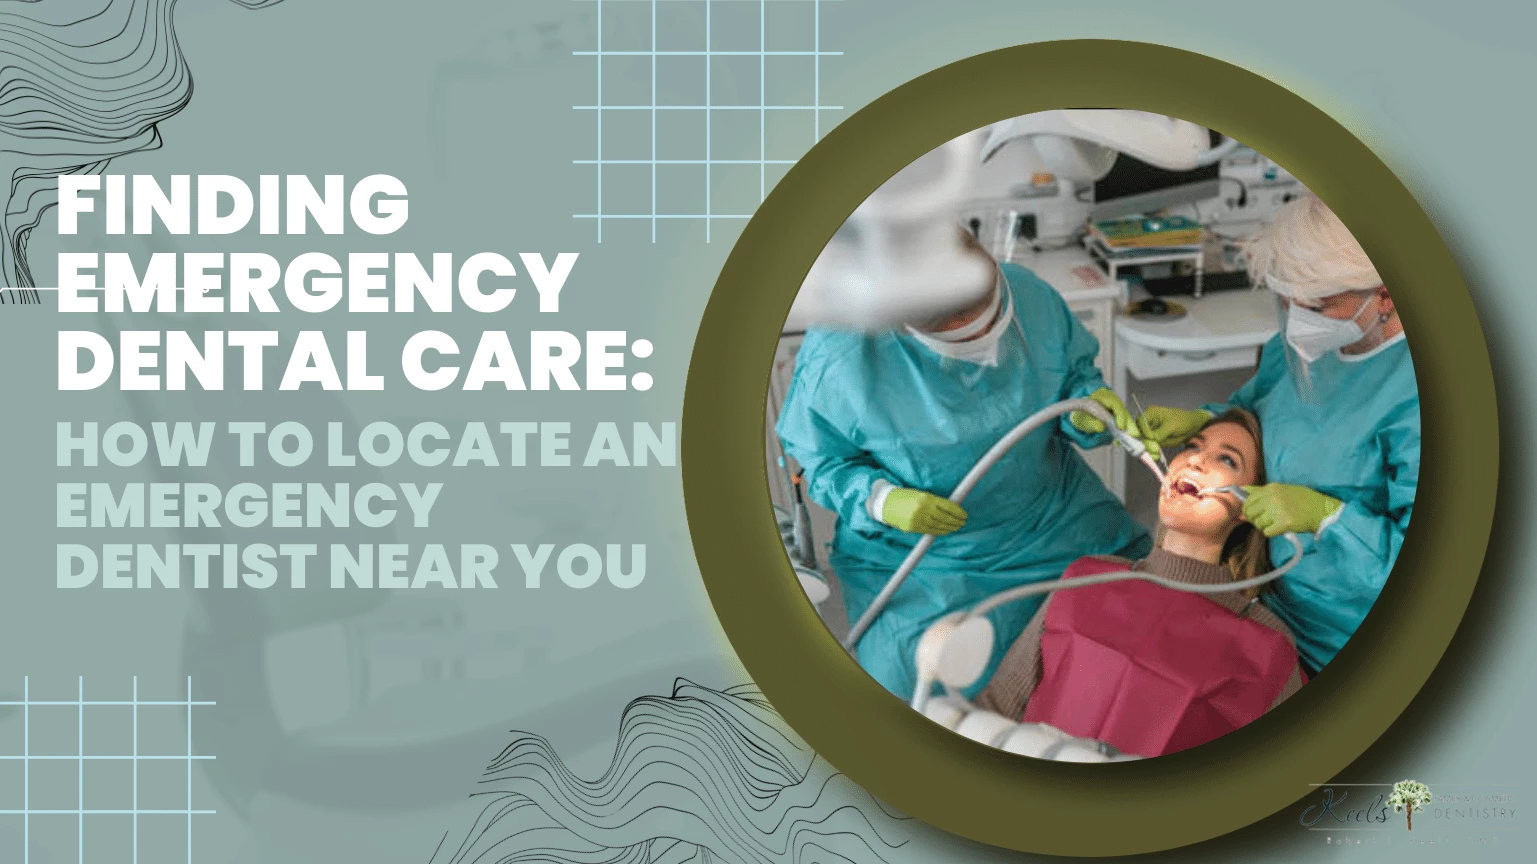 Finding Emergency Dental Care How to Locate an Emergency Dentist Near You (2)-1